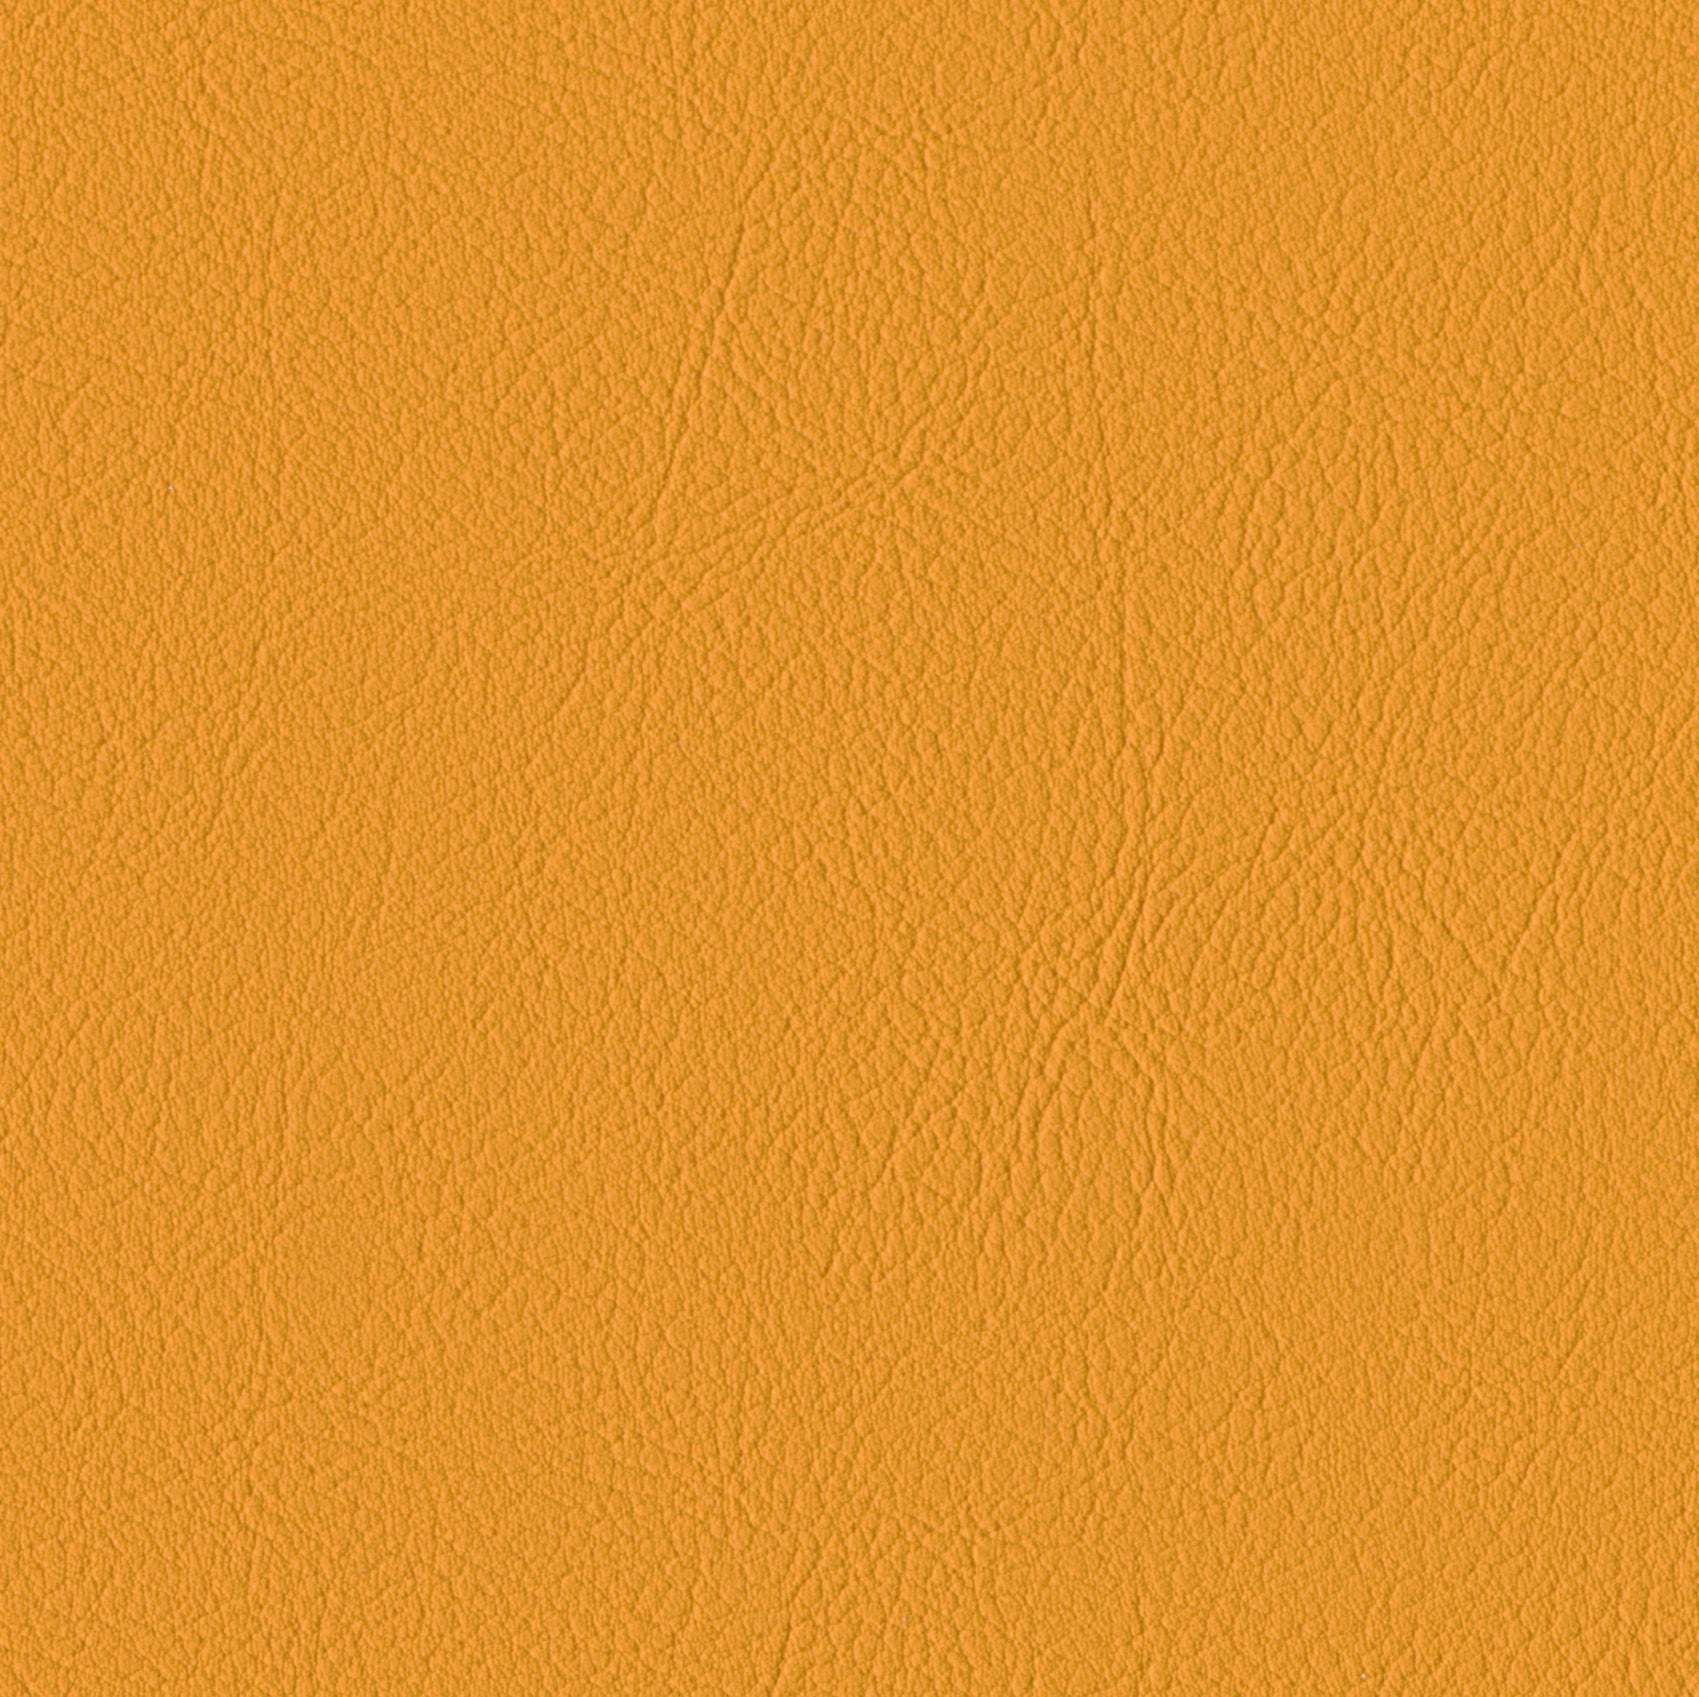    Andriali-Contract-Vinyl_Upholstery-Design-LegacyFR-Color-130Apricot-Width-140cm